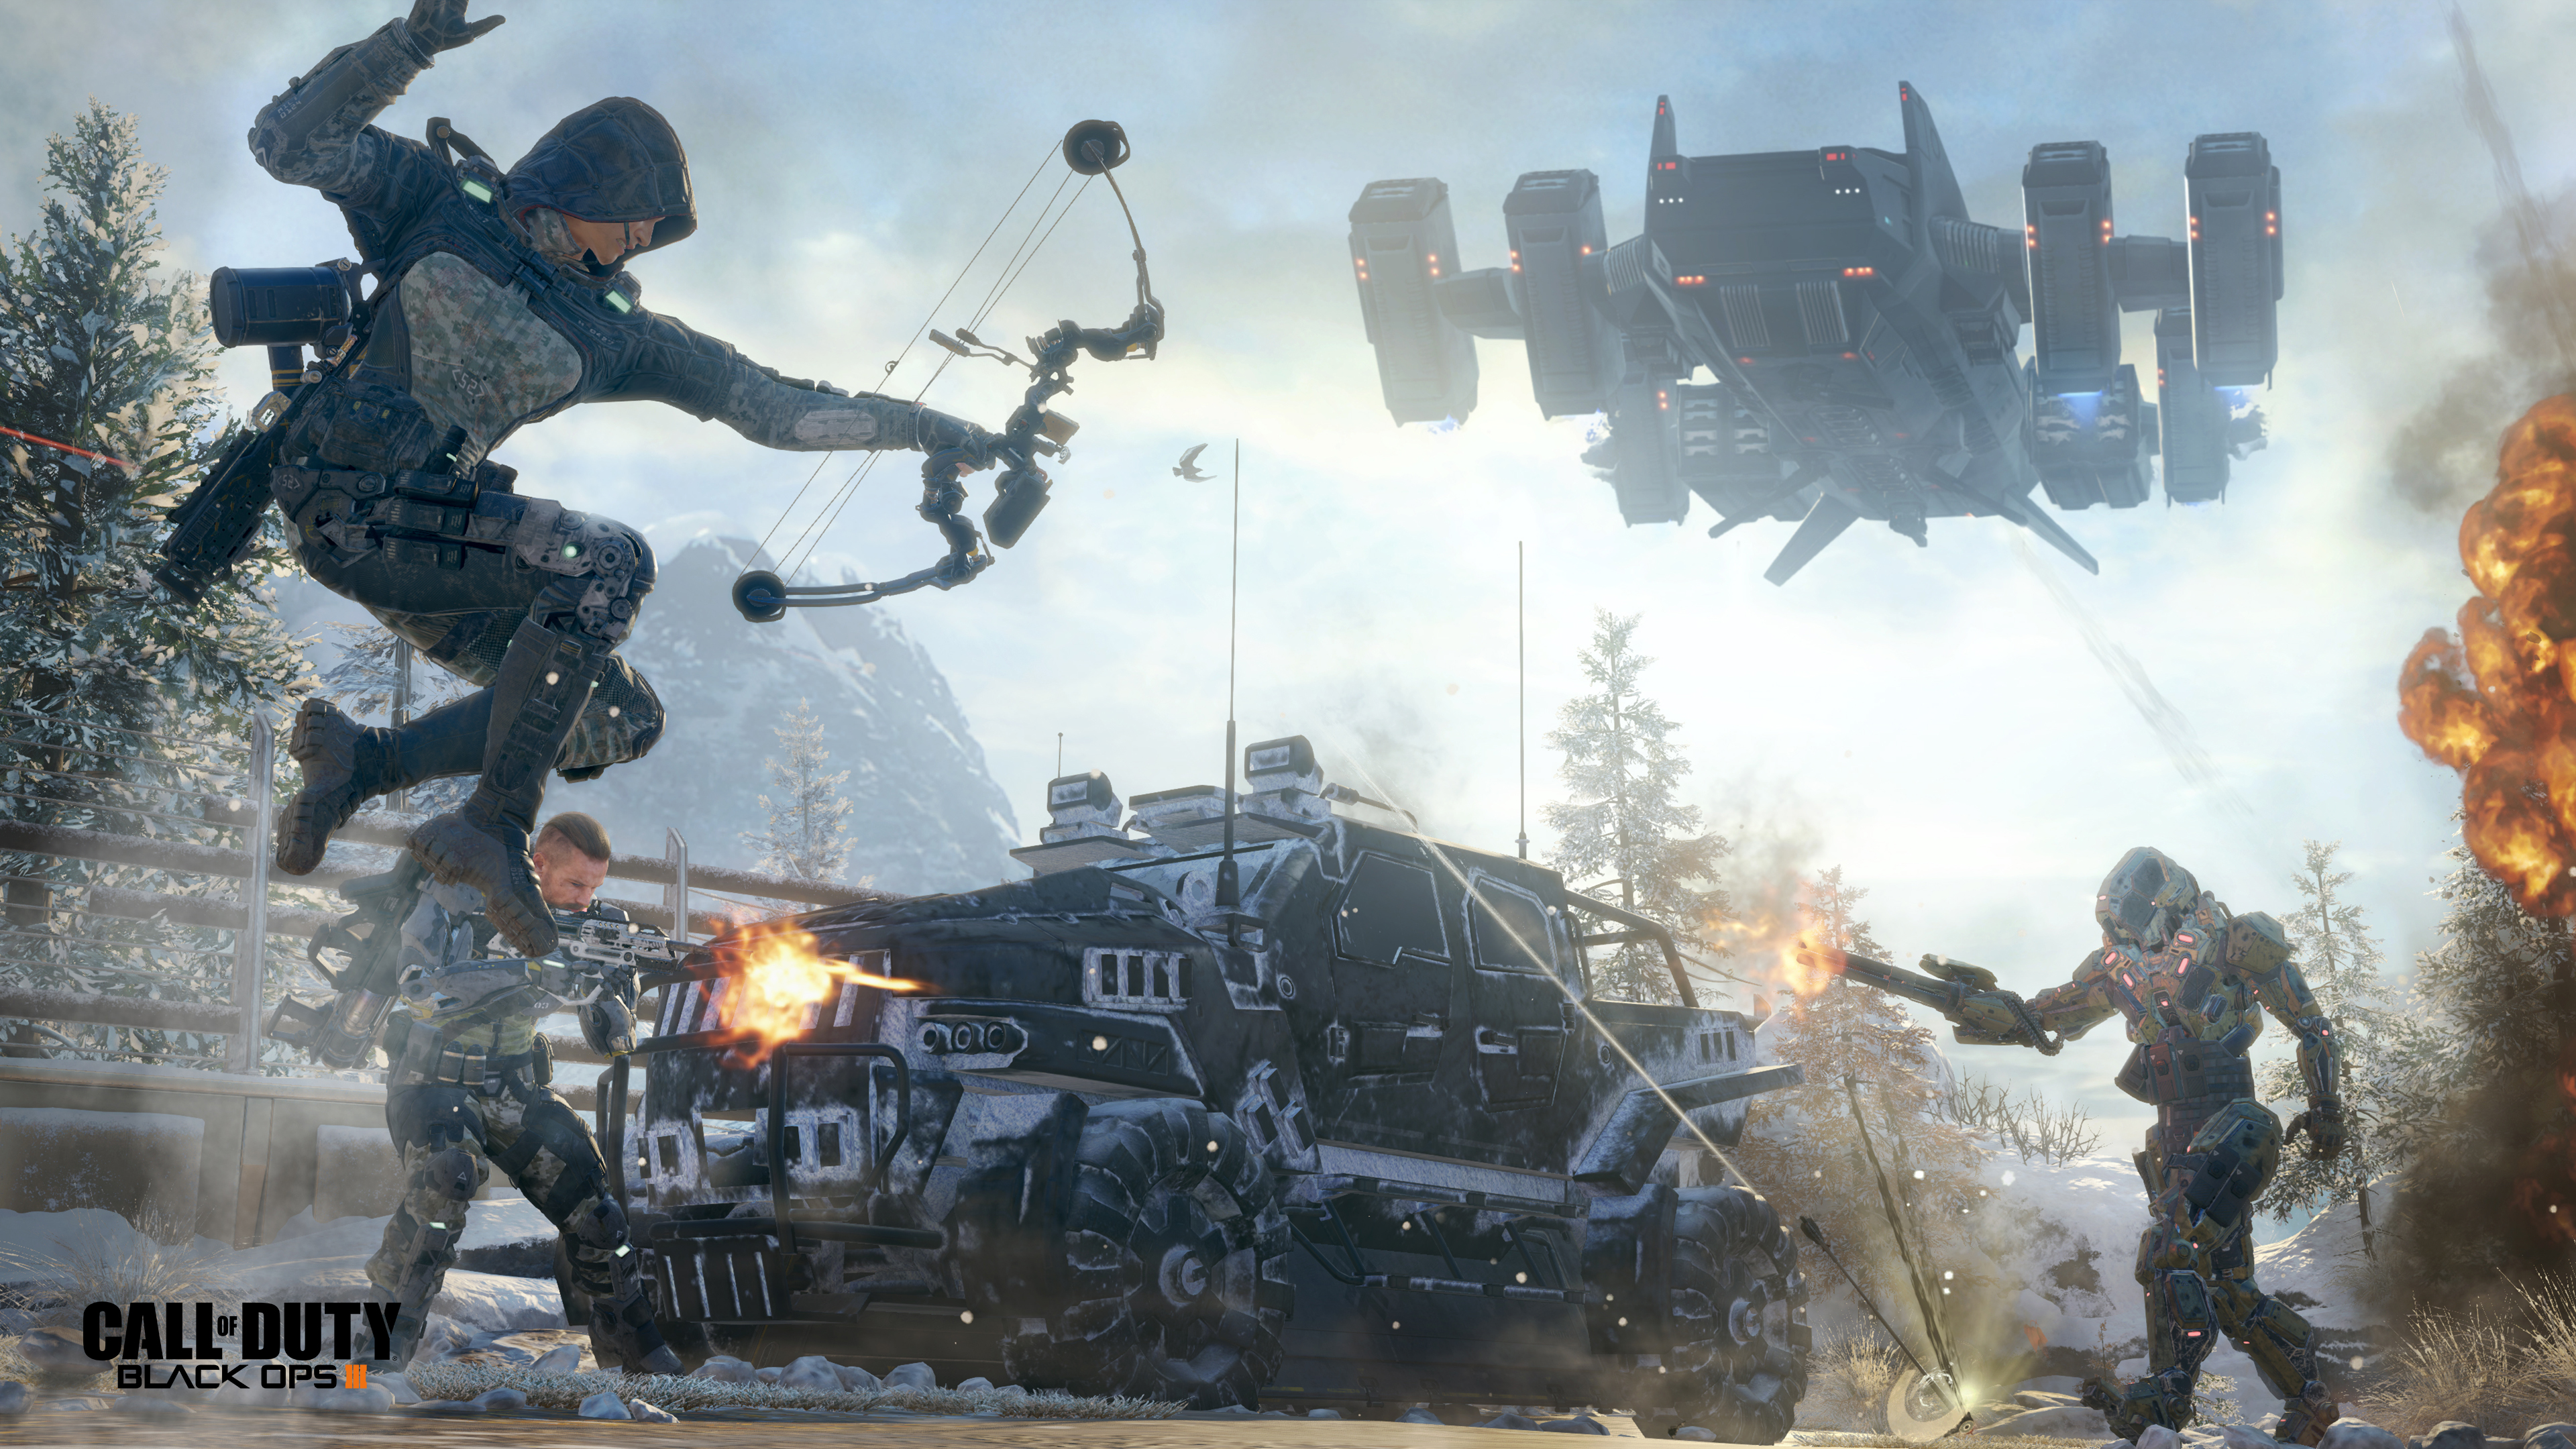 Download Call Of Duty Black Ops 3 Wallpaper 4 3840x2160